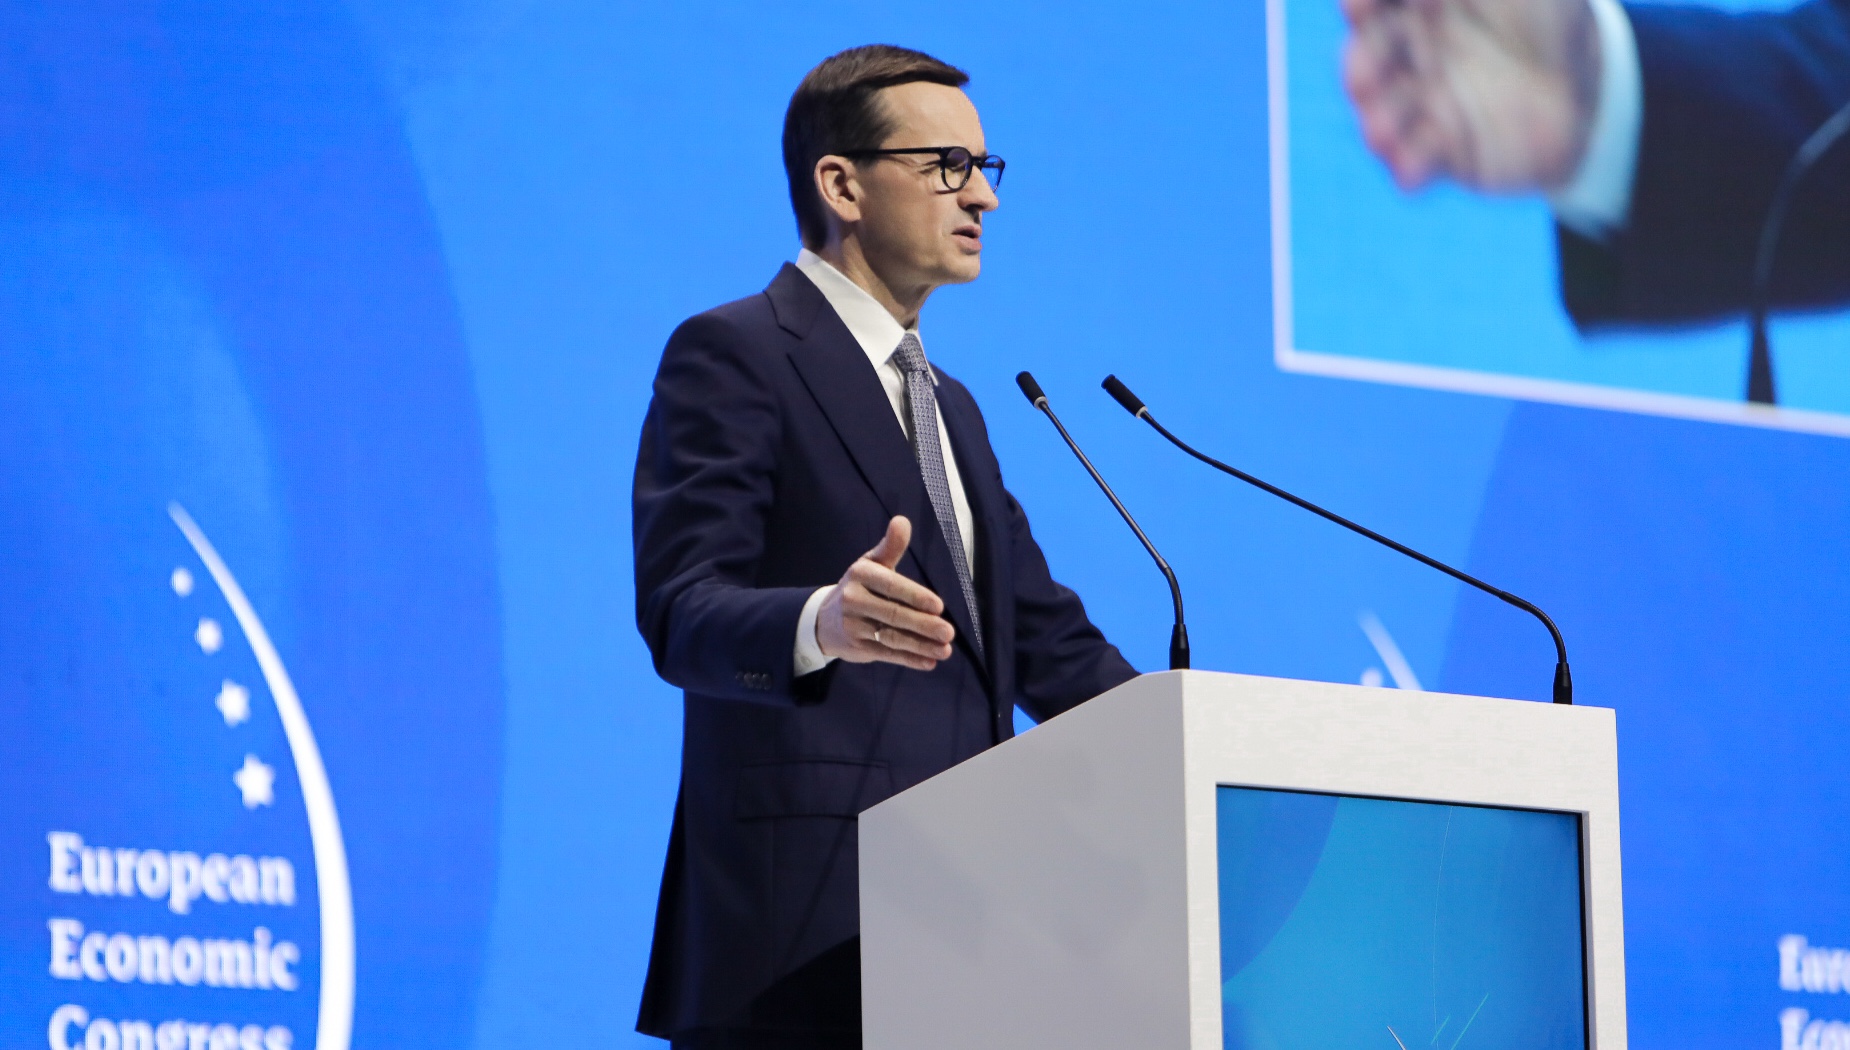 Mateusz Morawiecki, the Polish prime minister, has said that the ruling United Right coalition might win the next parliamentary election and continue to hold power.